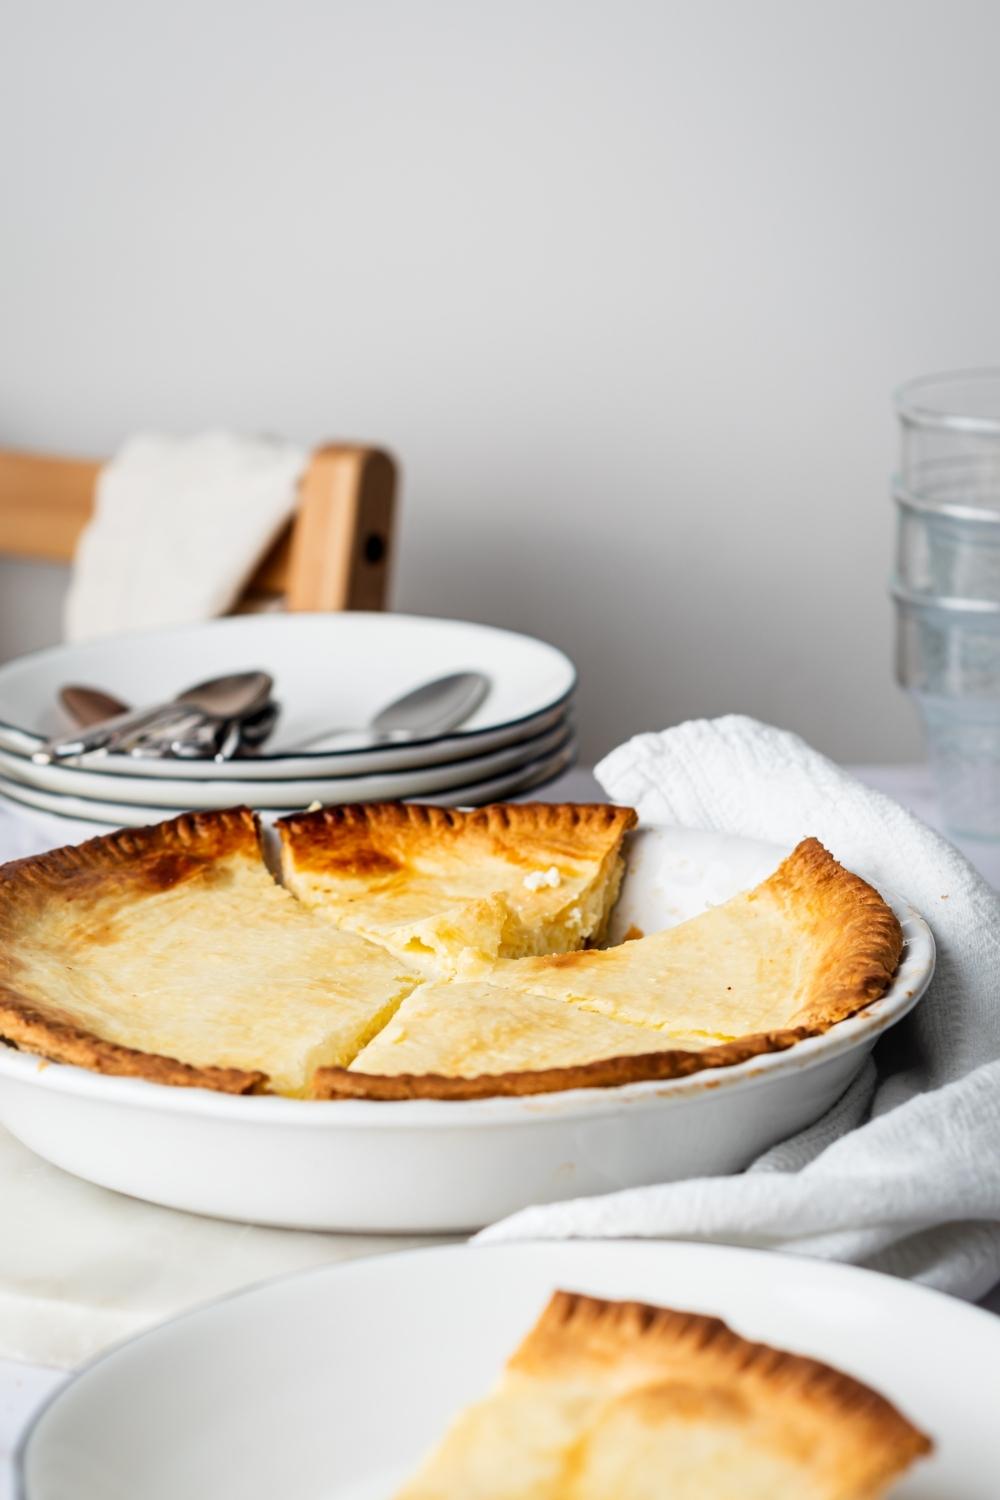 A ricotta pie in a pie dish with one slice missing from it.